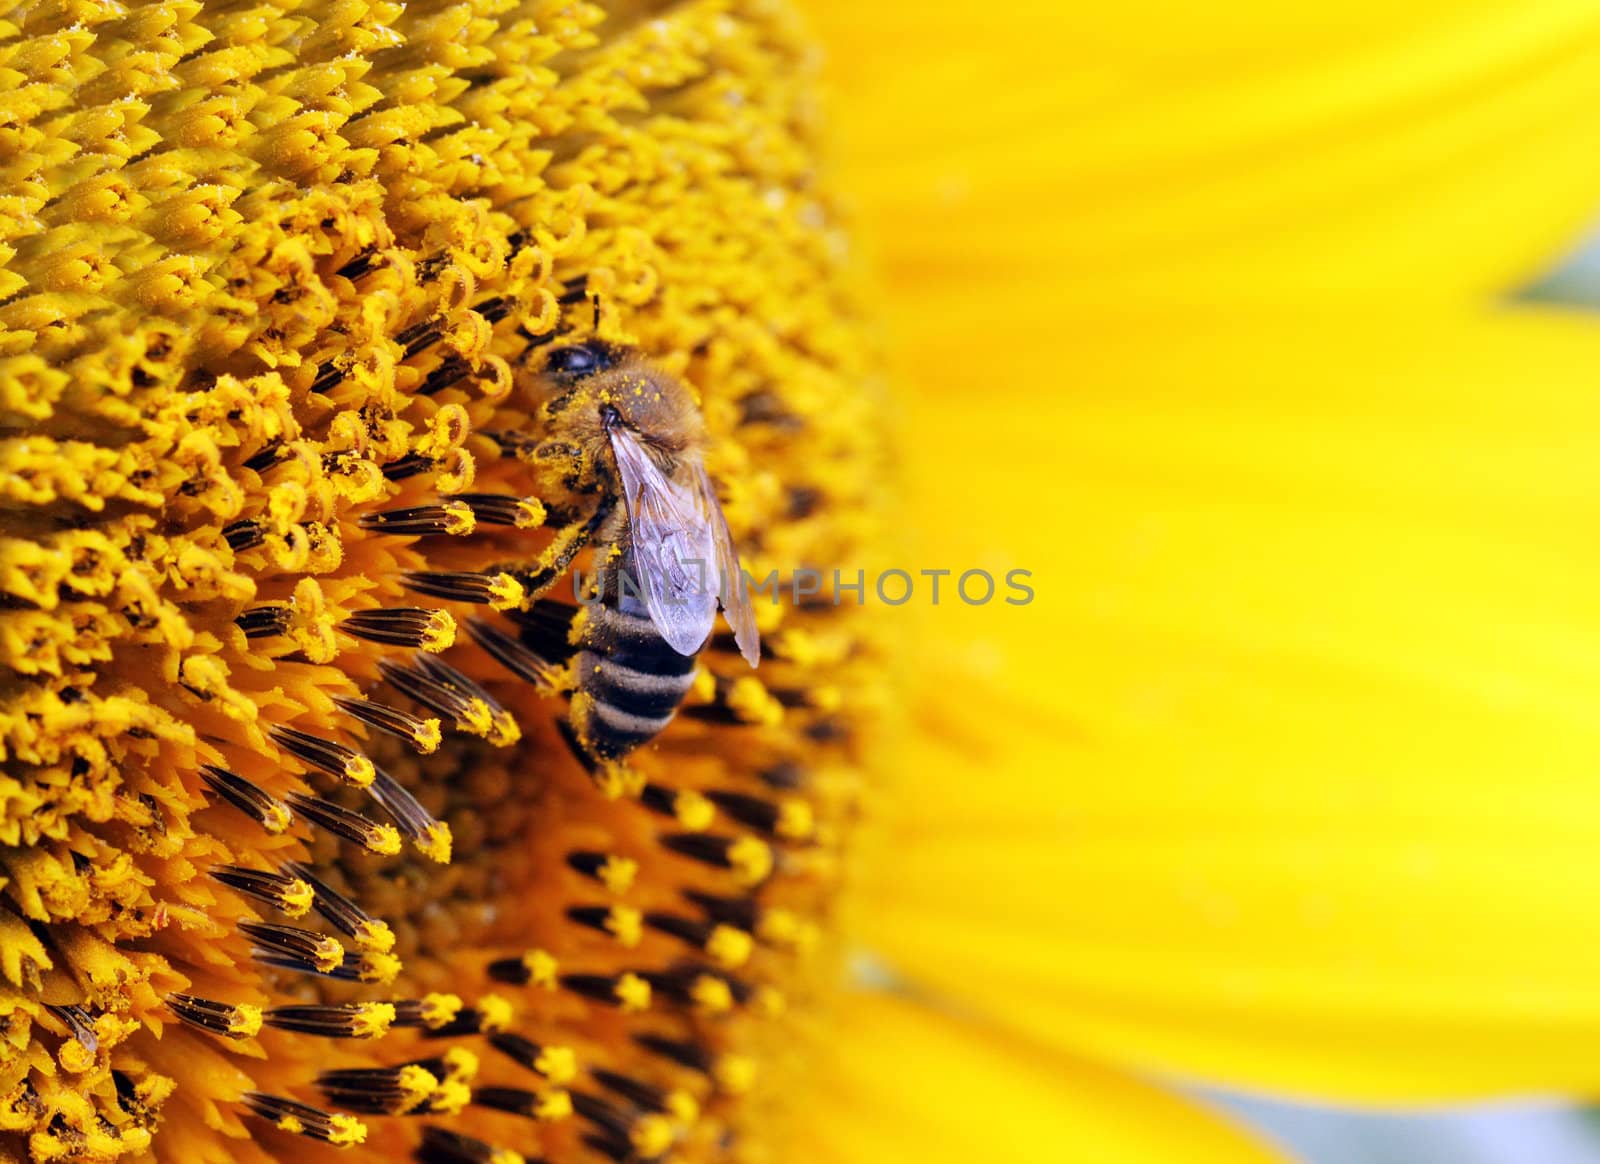 close up of bee on sunflower